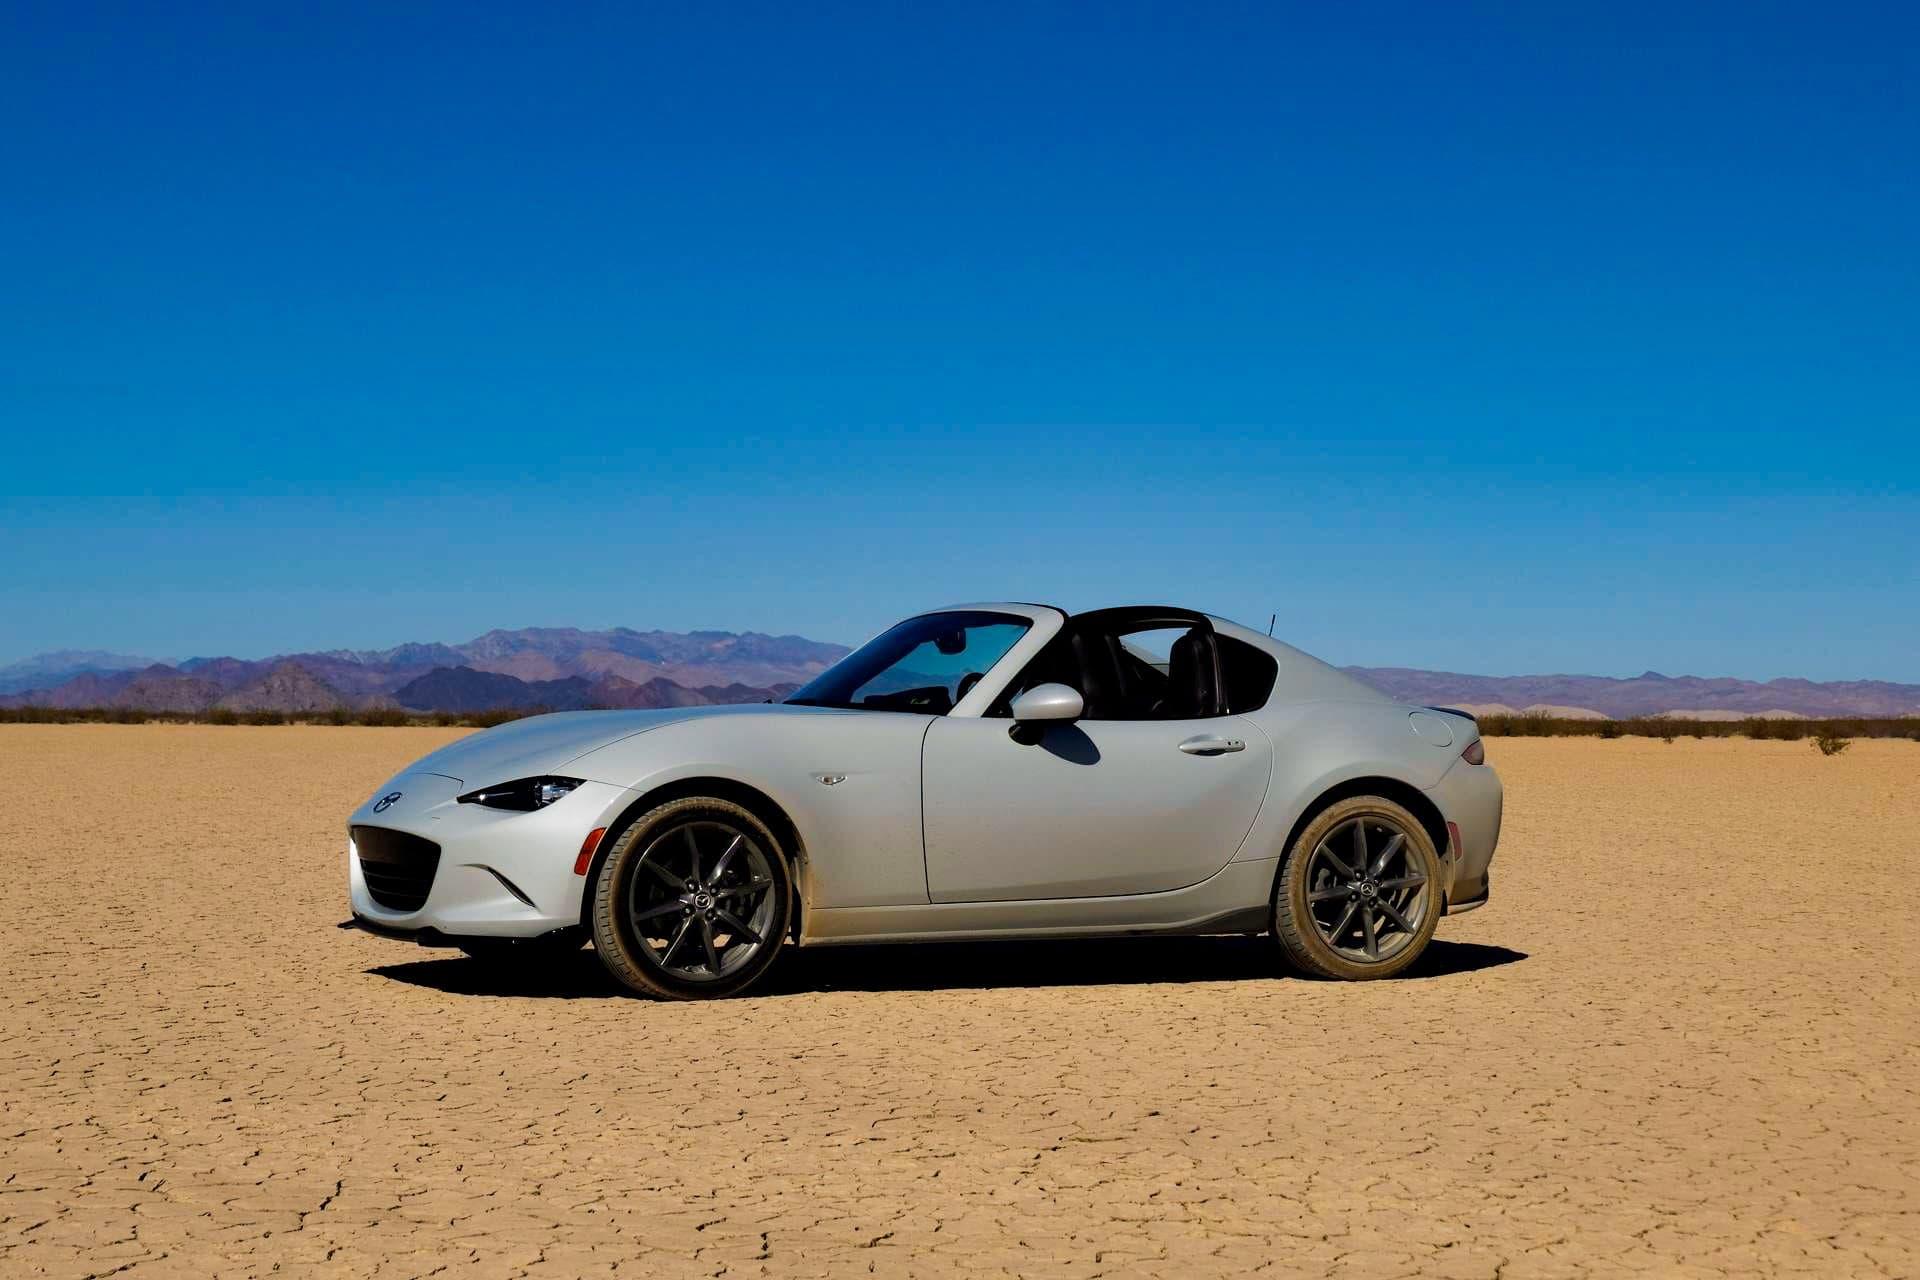 2020 Mazda Miata RF Review: Why It’s Better Than a 760 HP Mustang